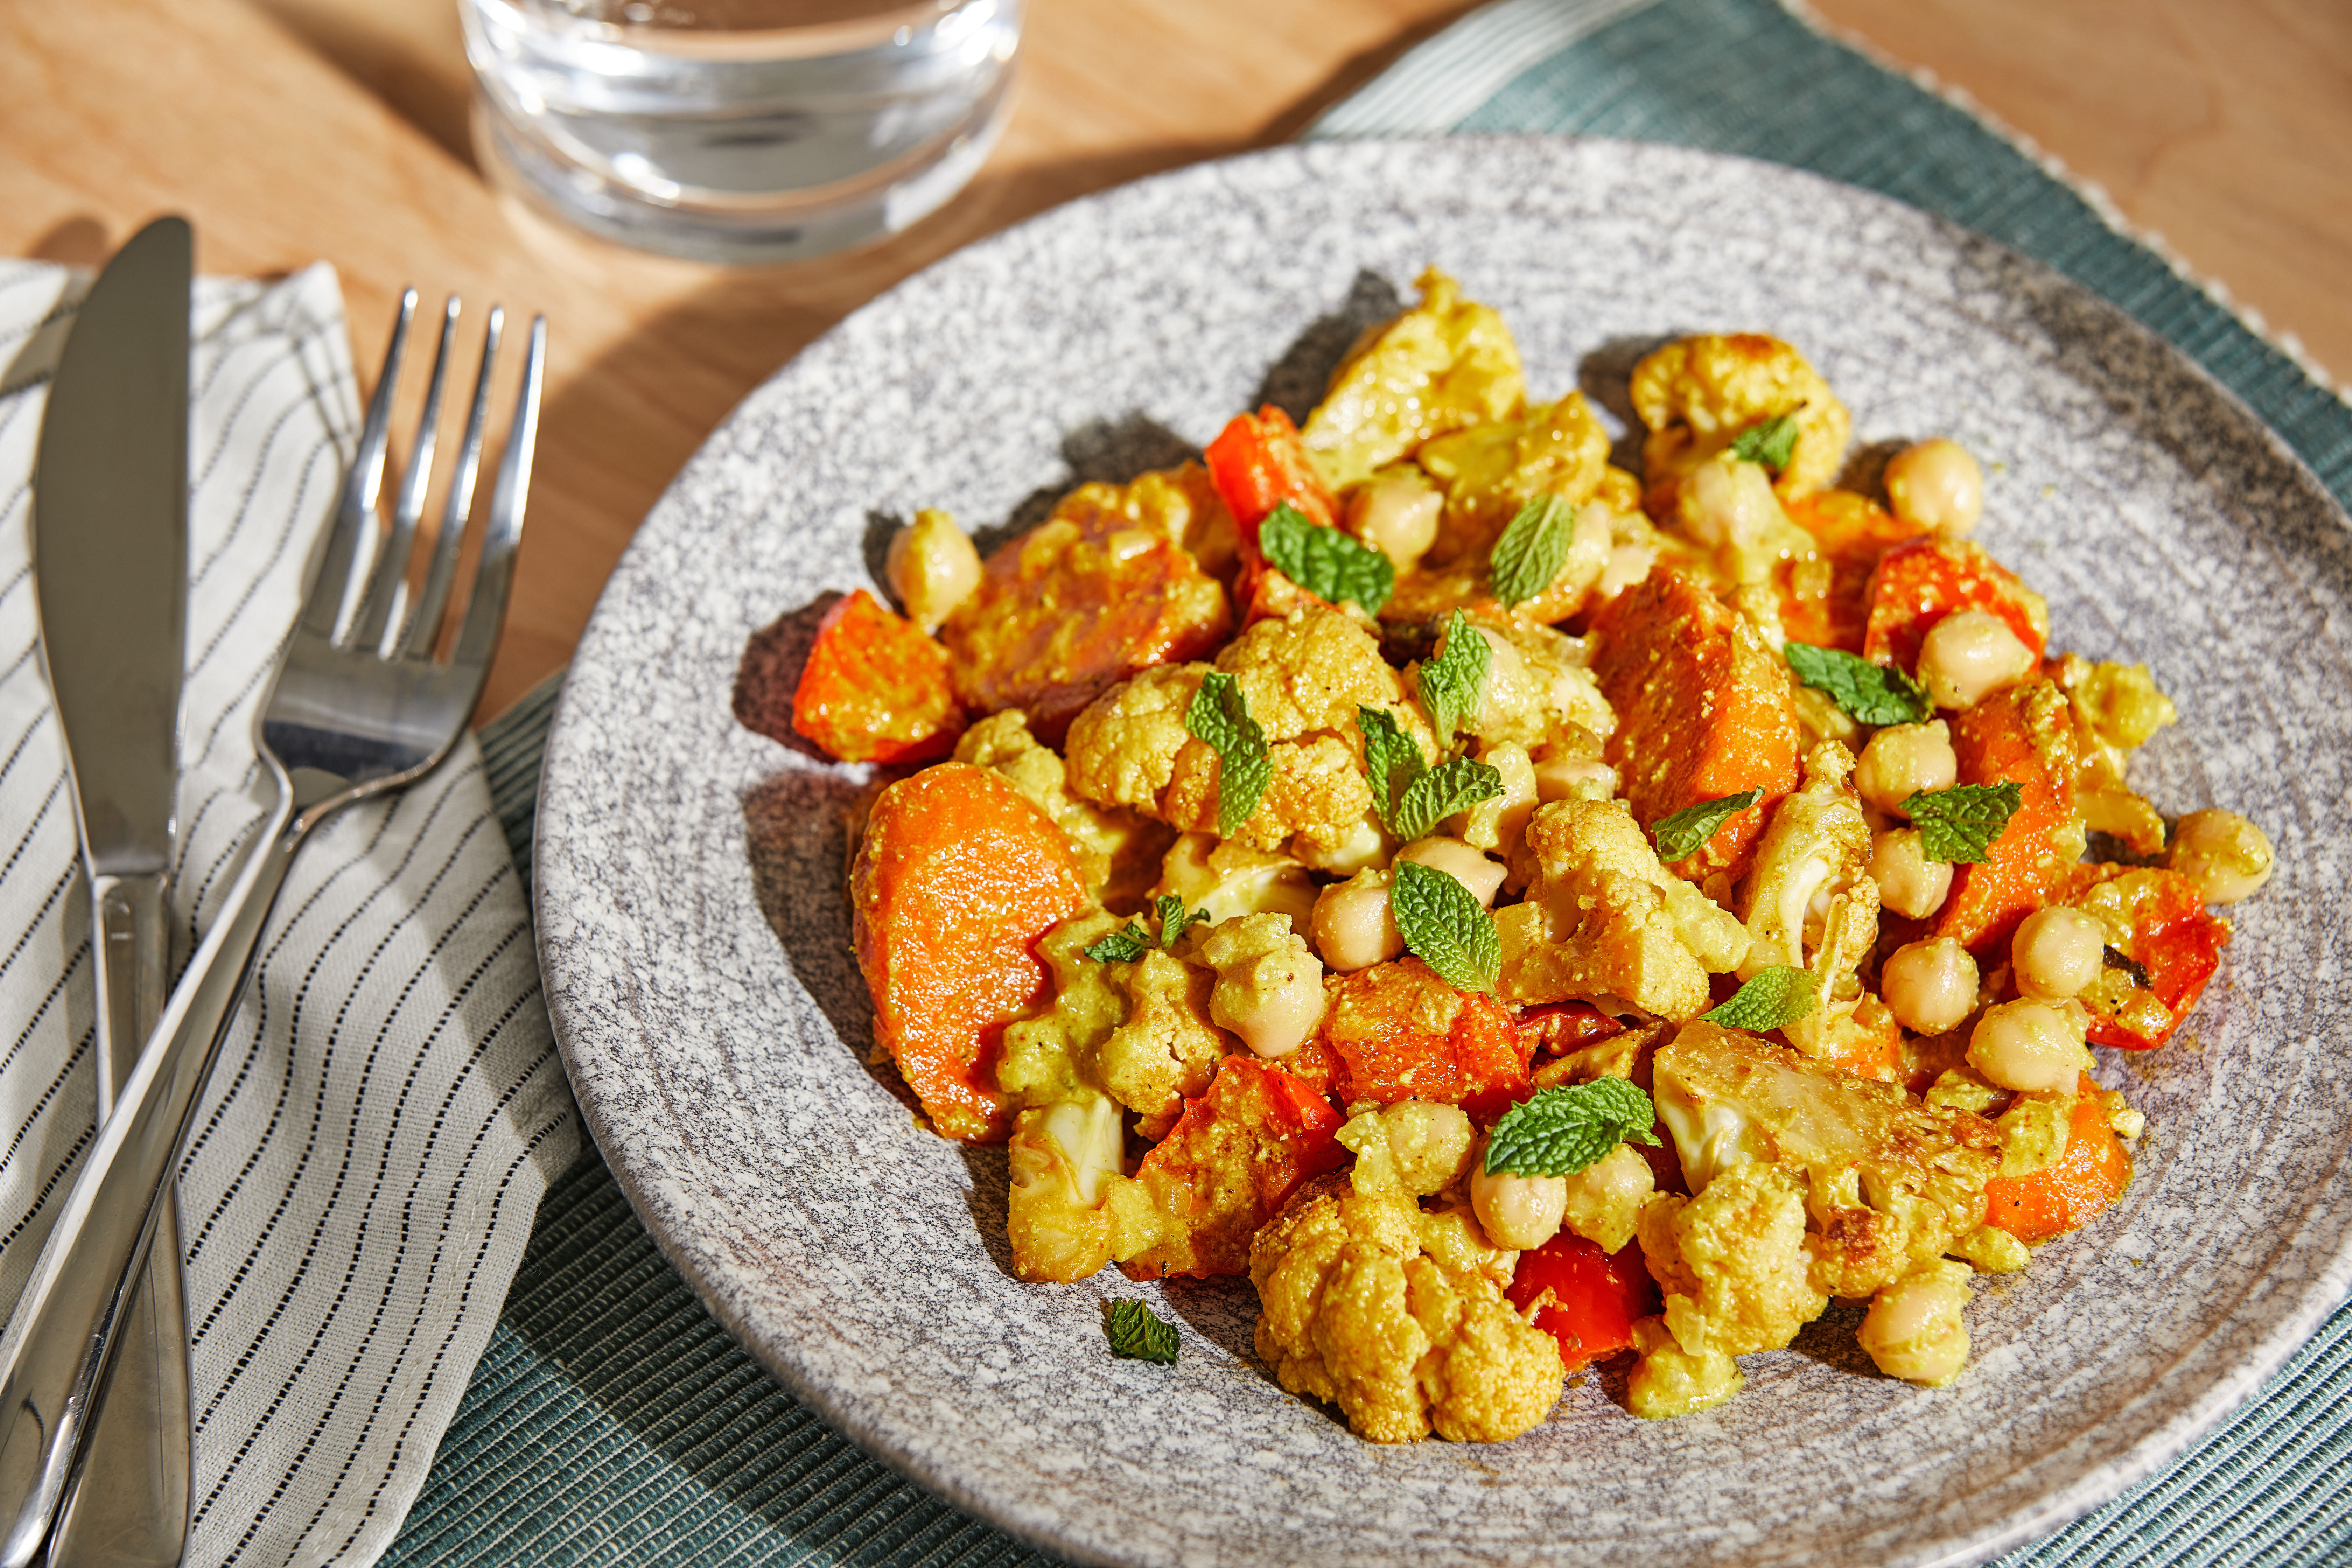 This luscious almond sauce coats roasted vegetables and chickpeas. It may become your favorite new way to dress up proteins and other ingredientsbecome your favorite new way to dress up proteins and other ingredients
	